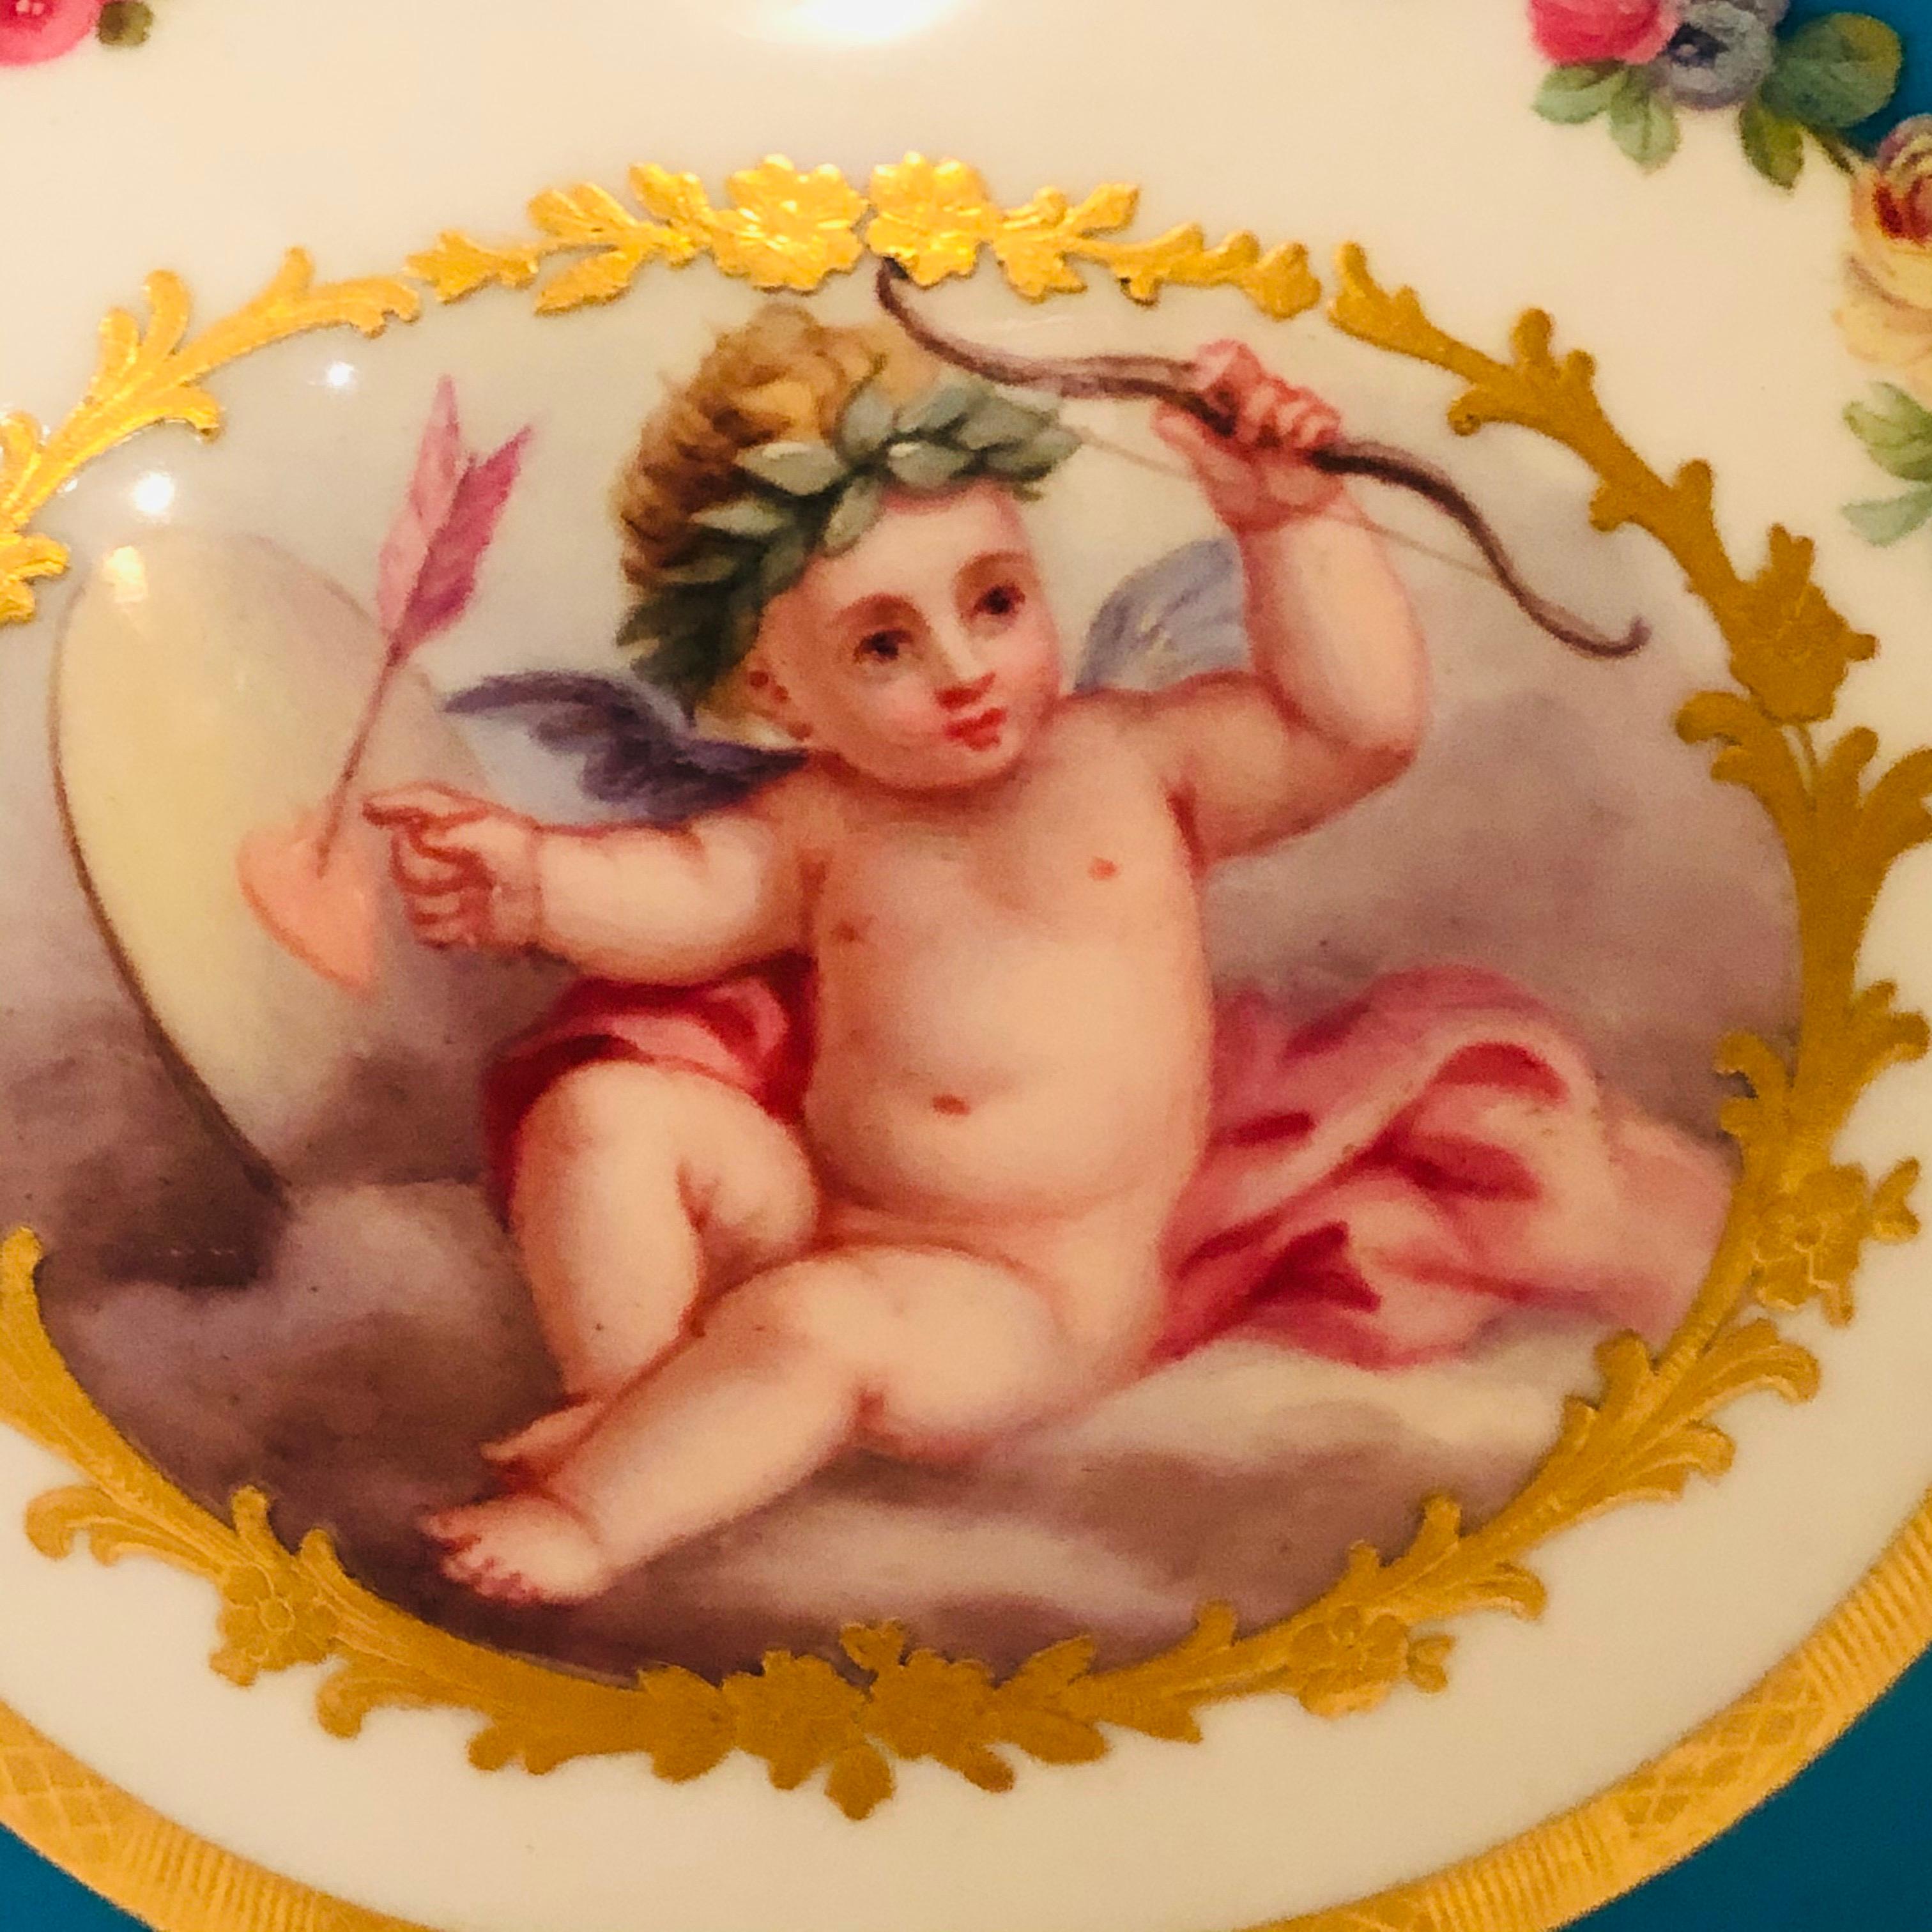 I would like to offer you this absolutely wonderful celeste blue Minton urn. Minton made a number of pieces after Sèvres porcelain pieces, and this urn is a great example. The artwork on this urn is spectacular. It has two paintings of cherubs, one